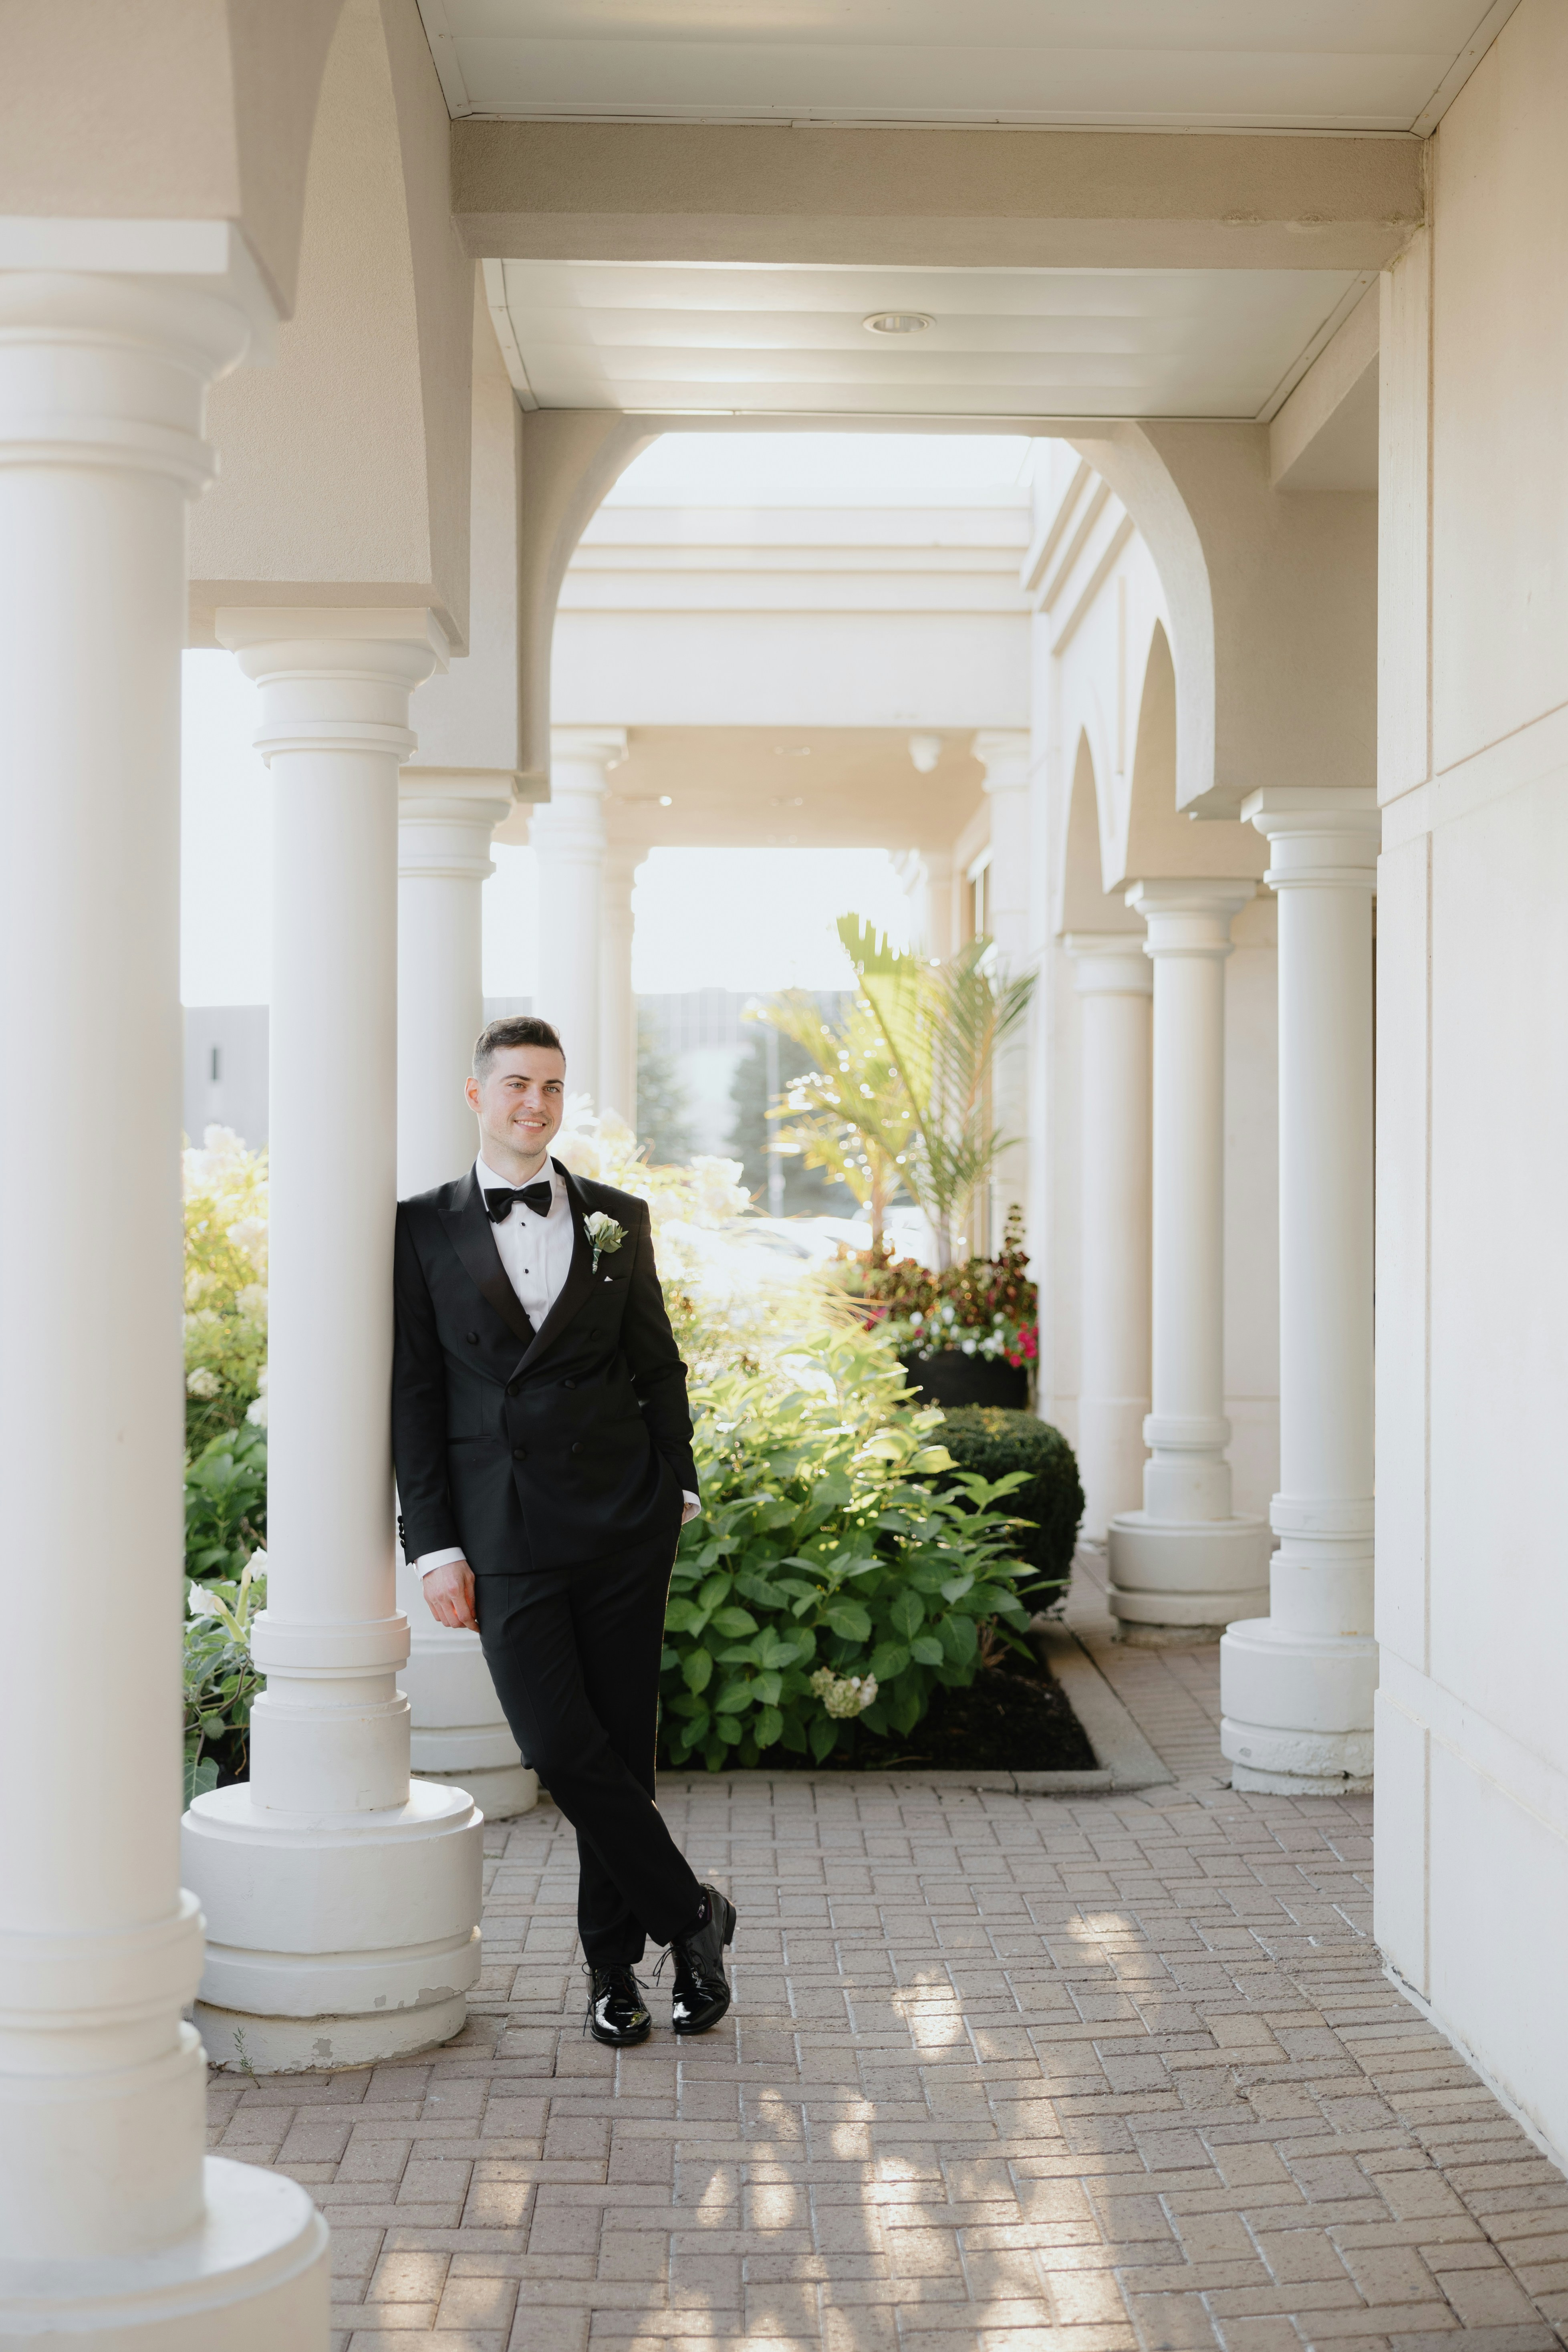 great photo recipe,how to photograph a man in a tuxedo poses for a picture